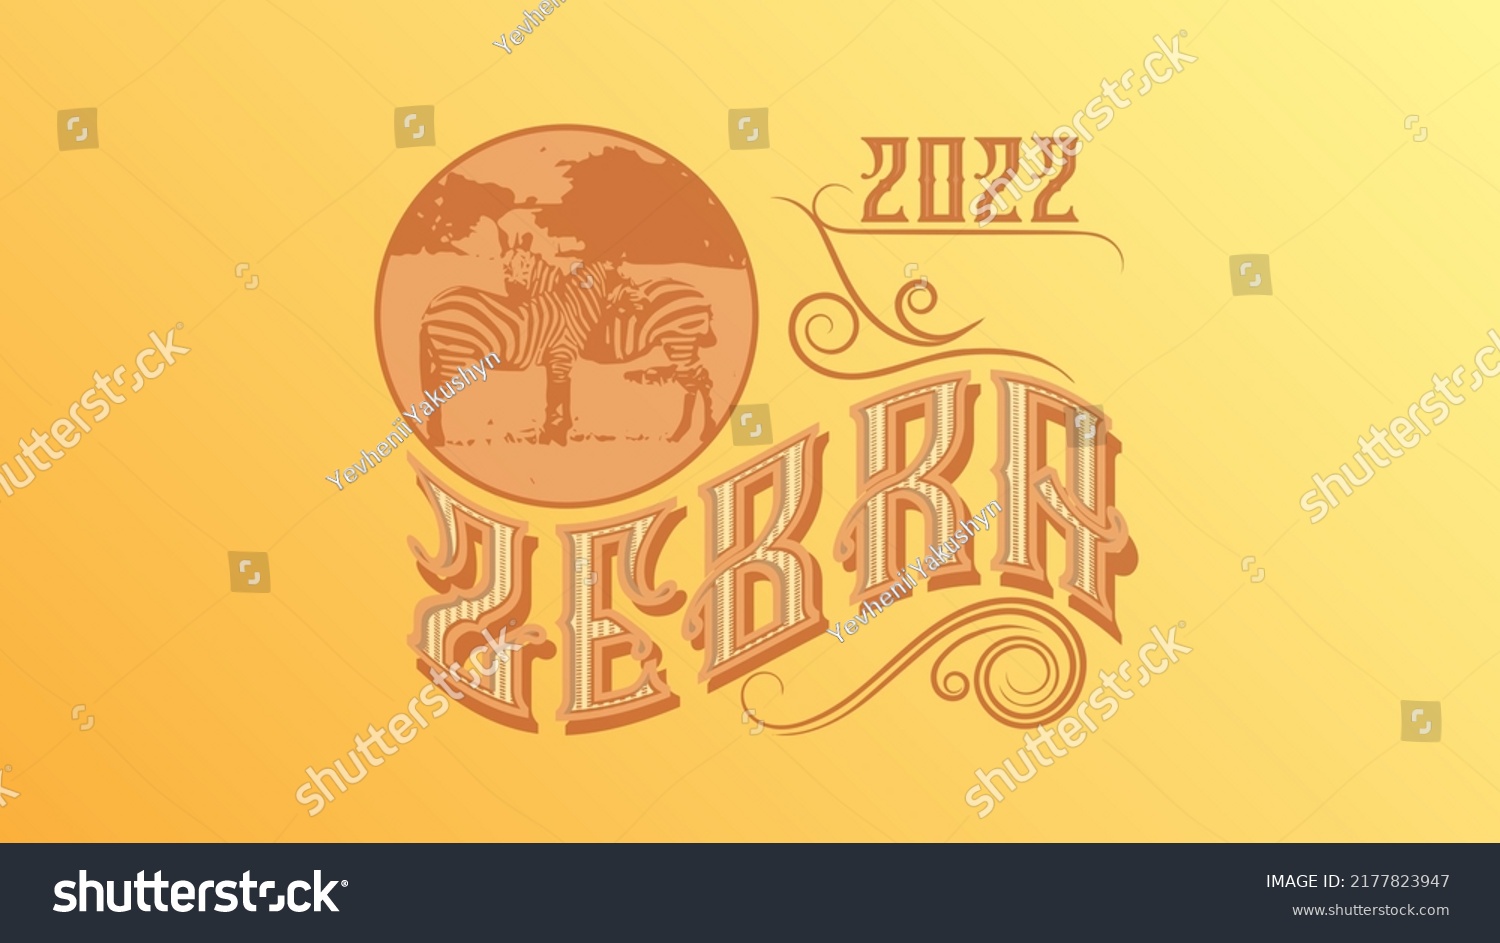 Stock Vector Zebra Logo Lettering Zebra Made In Gold Colors And Vintage Style 2177823947 